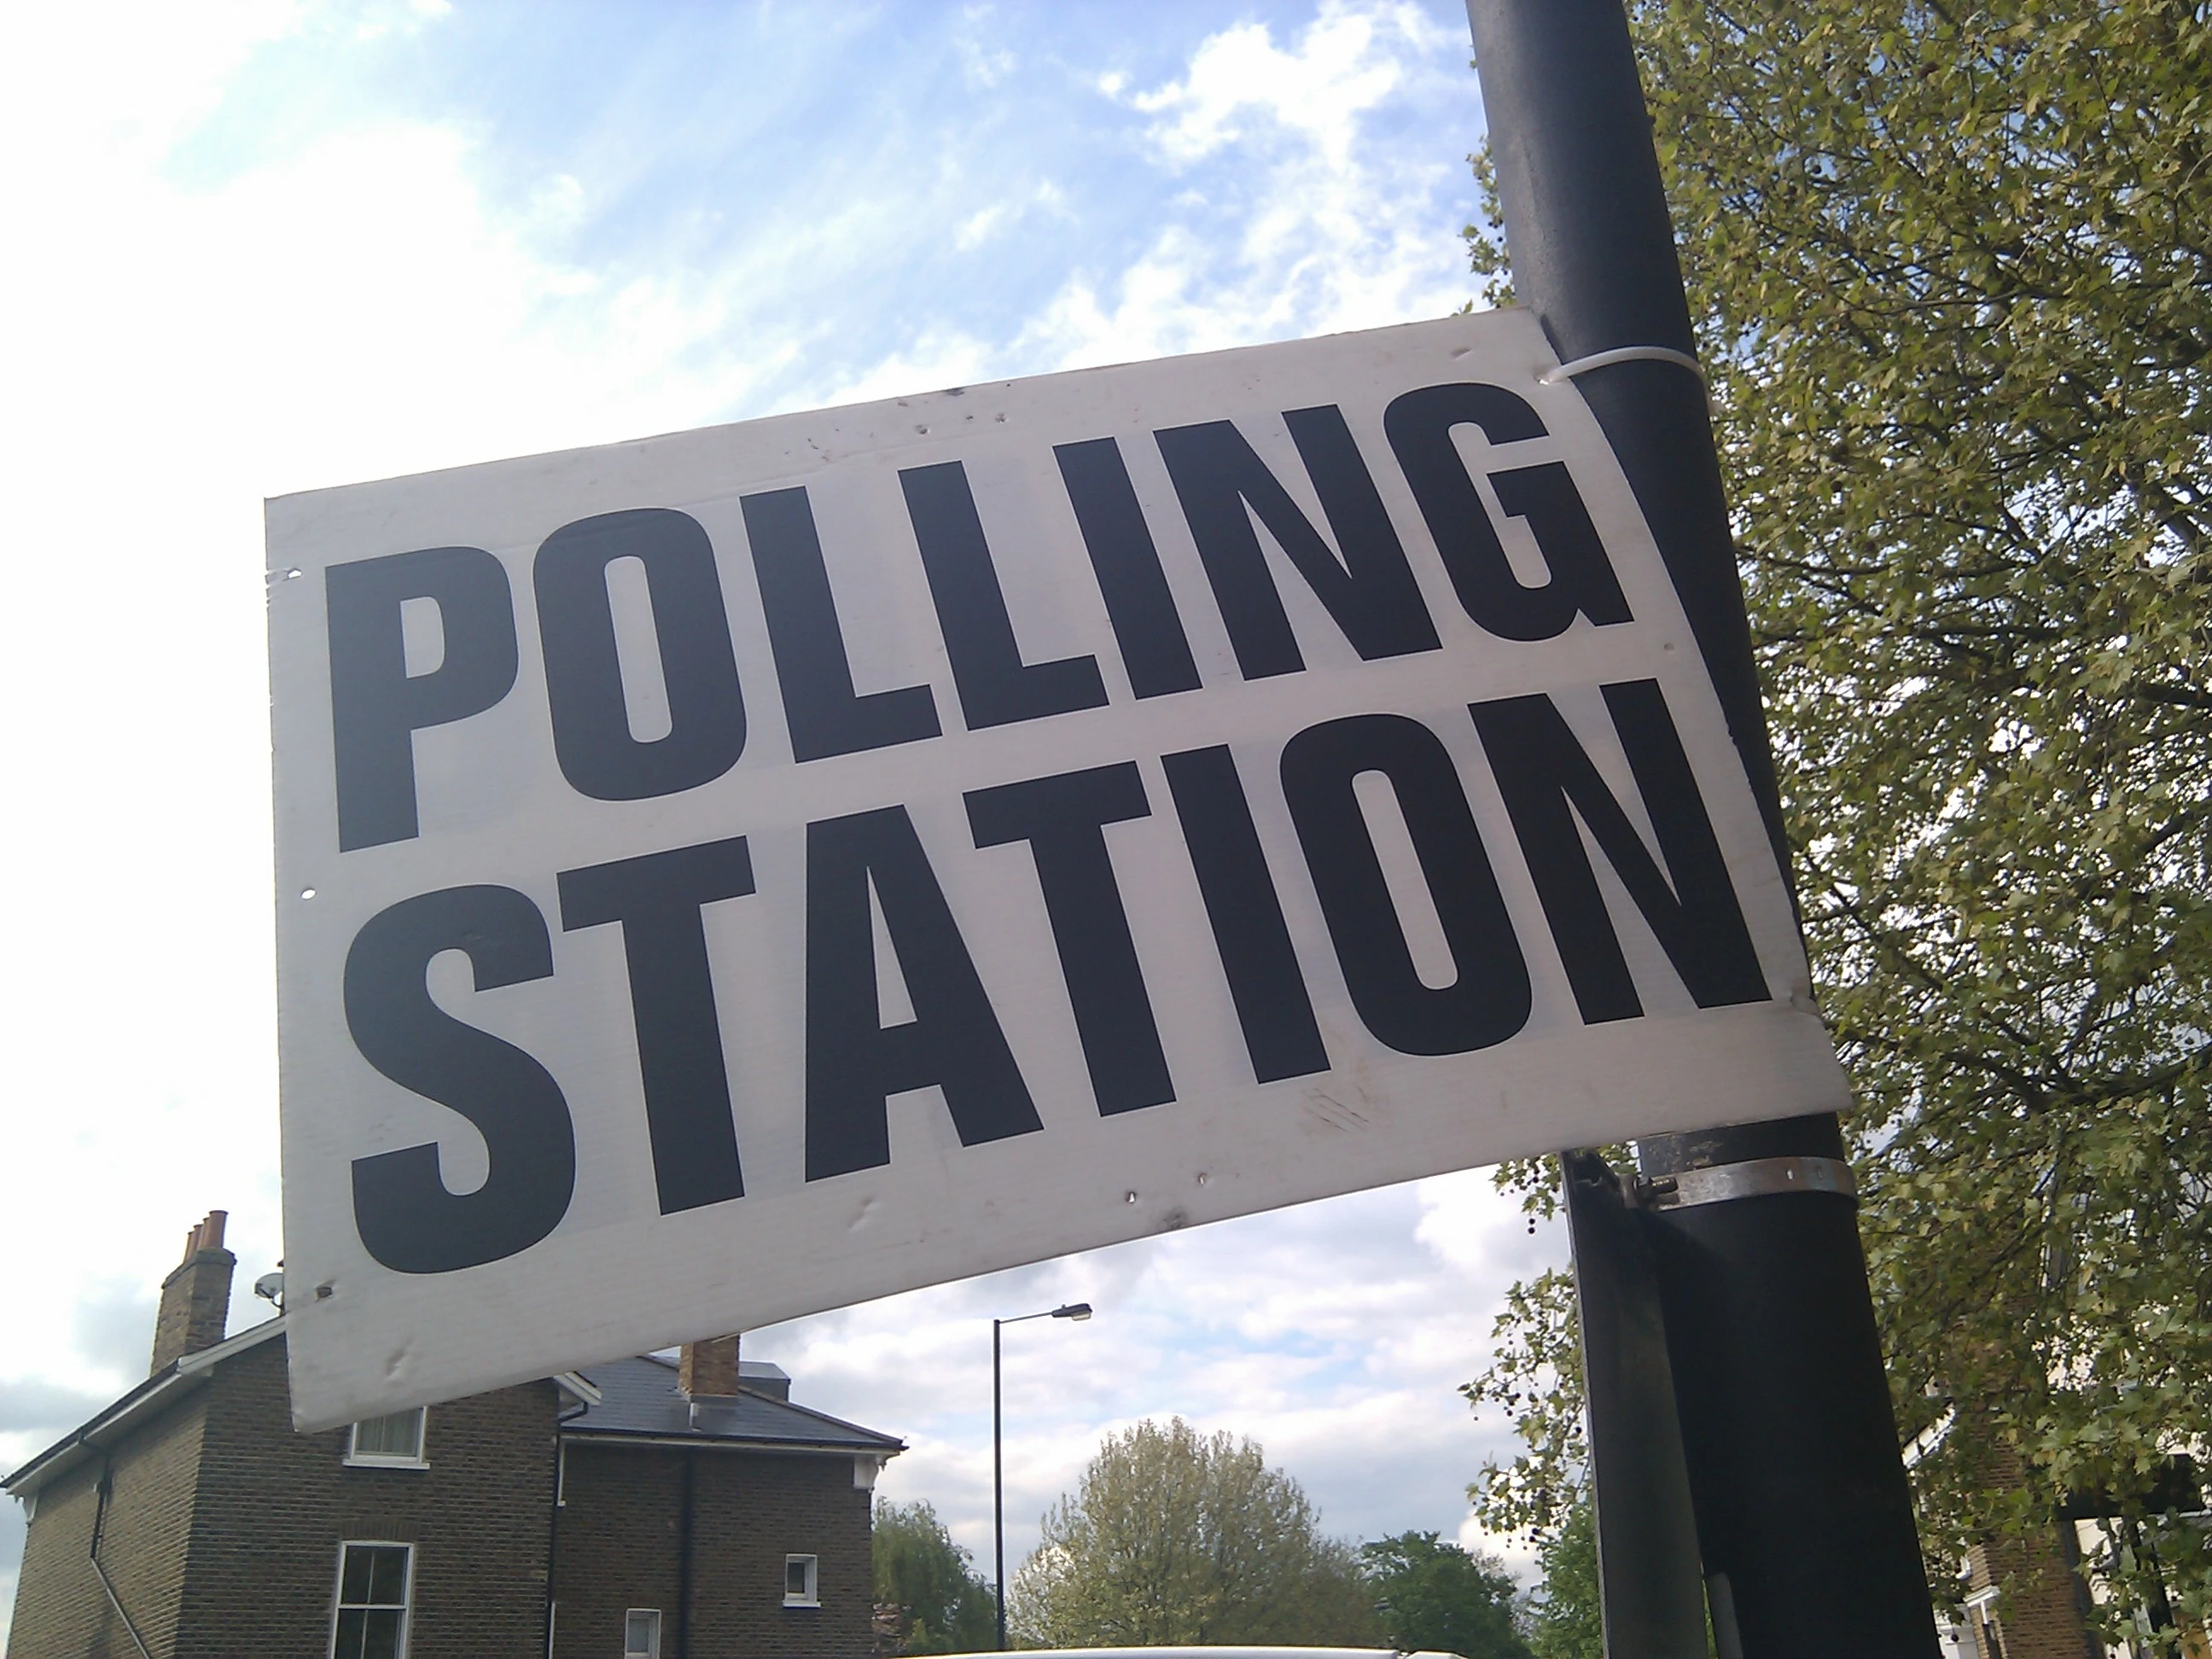 Sign for a UK polling station.